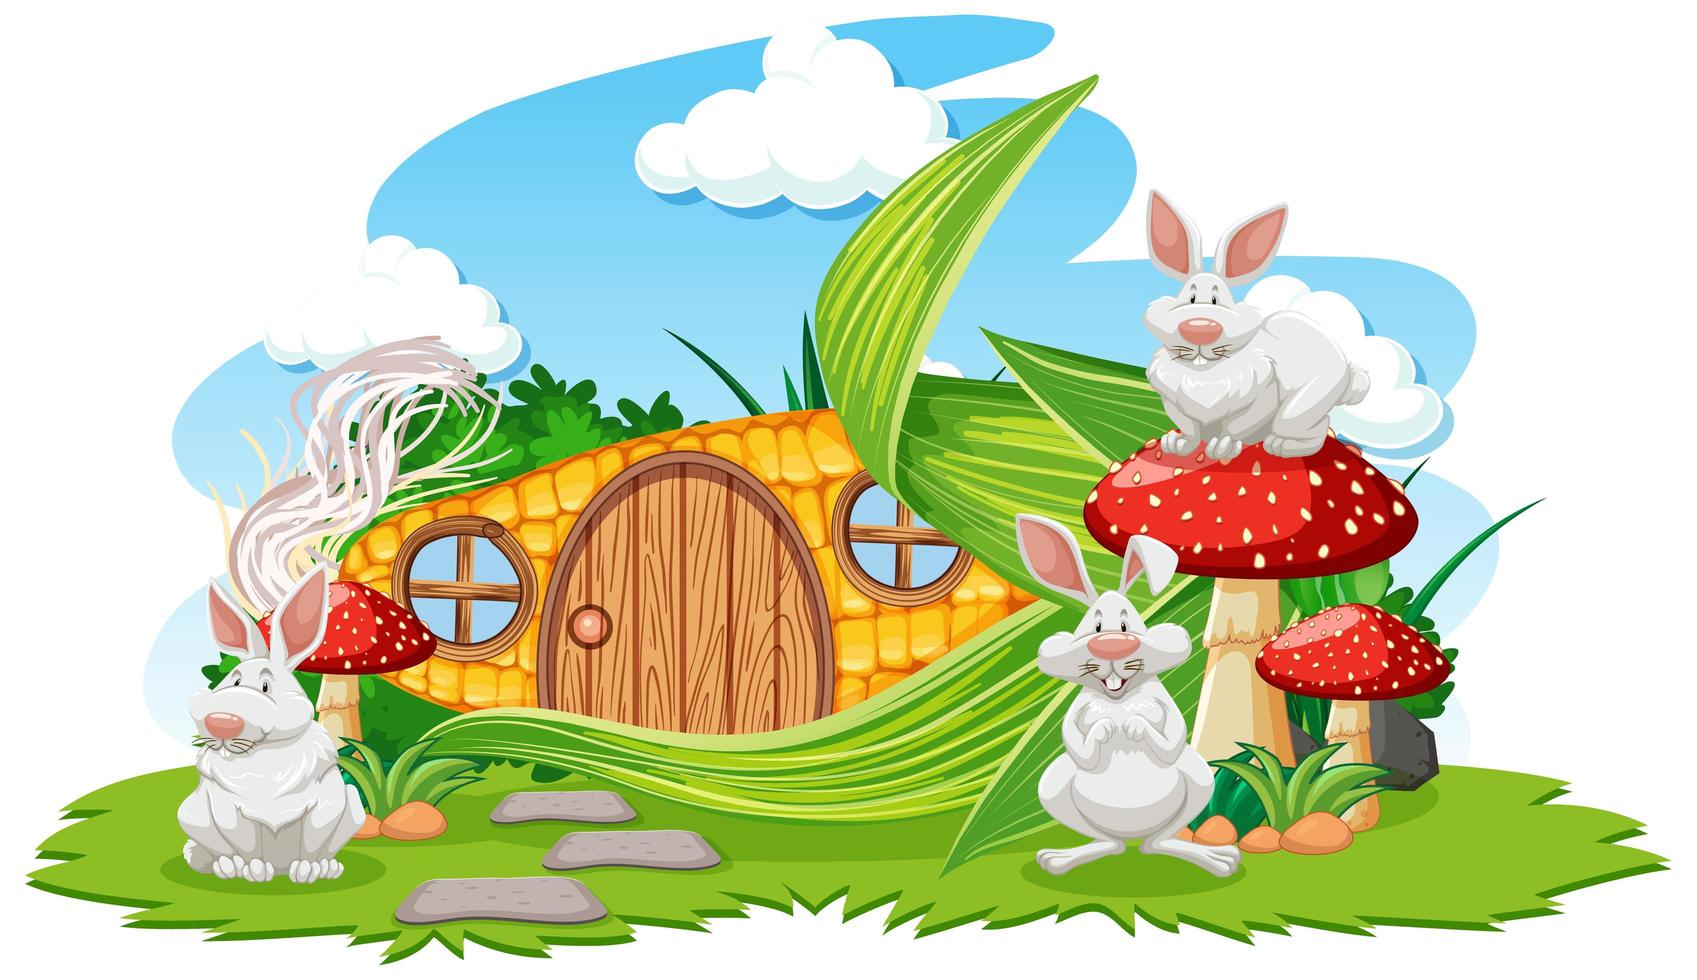 Corn house with three rabbits in cartoon style vector